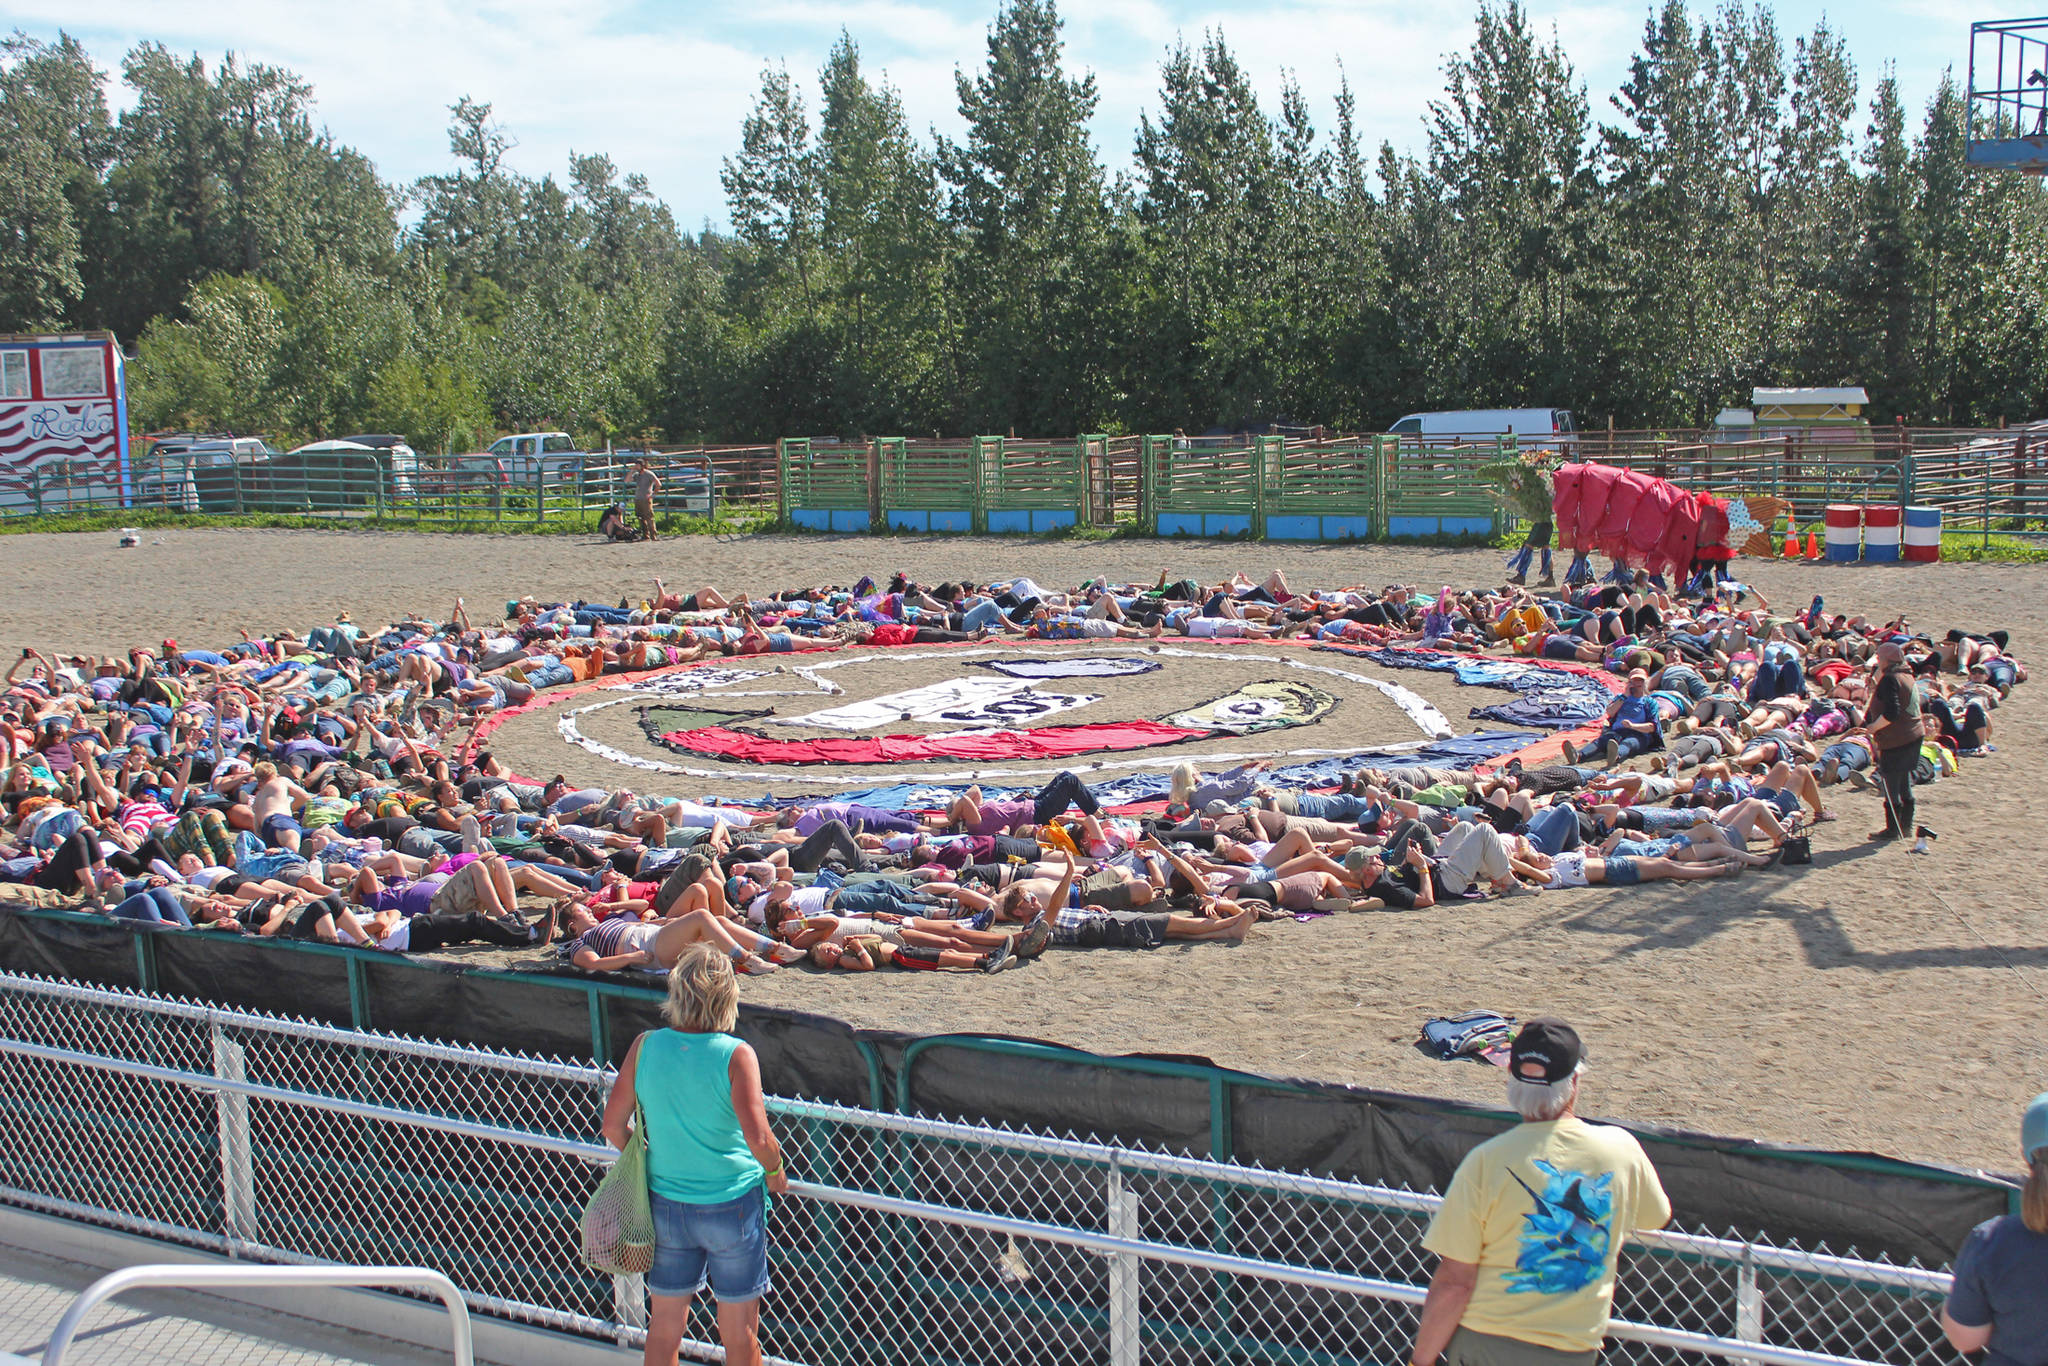 Festival goers prepare to participate in the annual art installation by Homer artist and activist Mavis Muller on Saturday, Aug. 3, 2019 at Salmonfest in Ninilchik, Alaska. Each year, Muller designs an image having to do with salmon and water and makes it out of large pieces of cloth on the rodeo grounds at the Ninilchik Fairgrounds. People attending the festival then surround the image for the final touch while a photo is taken from the air. (Photo by Megan Pacer/Homer News)